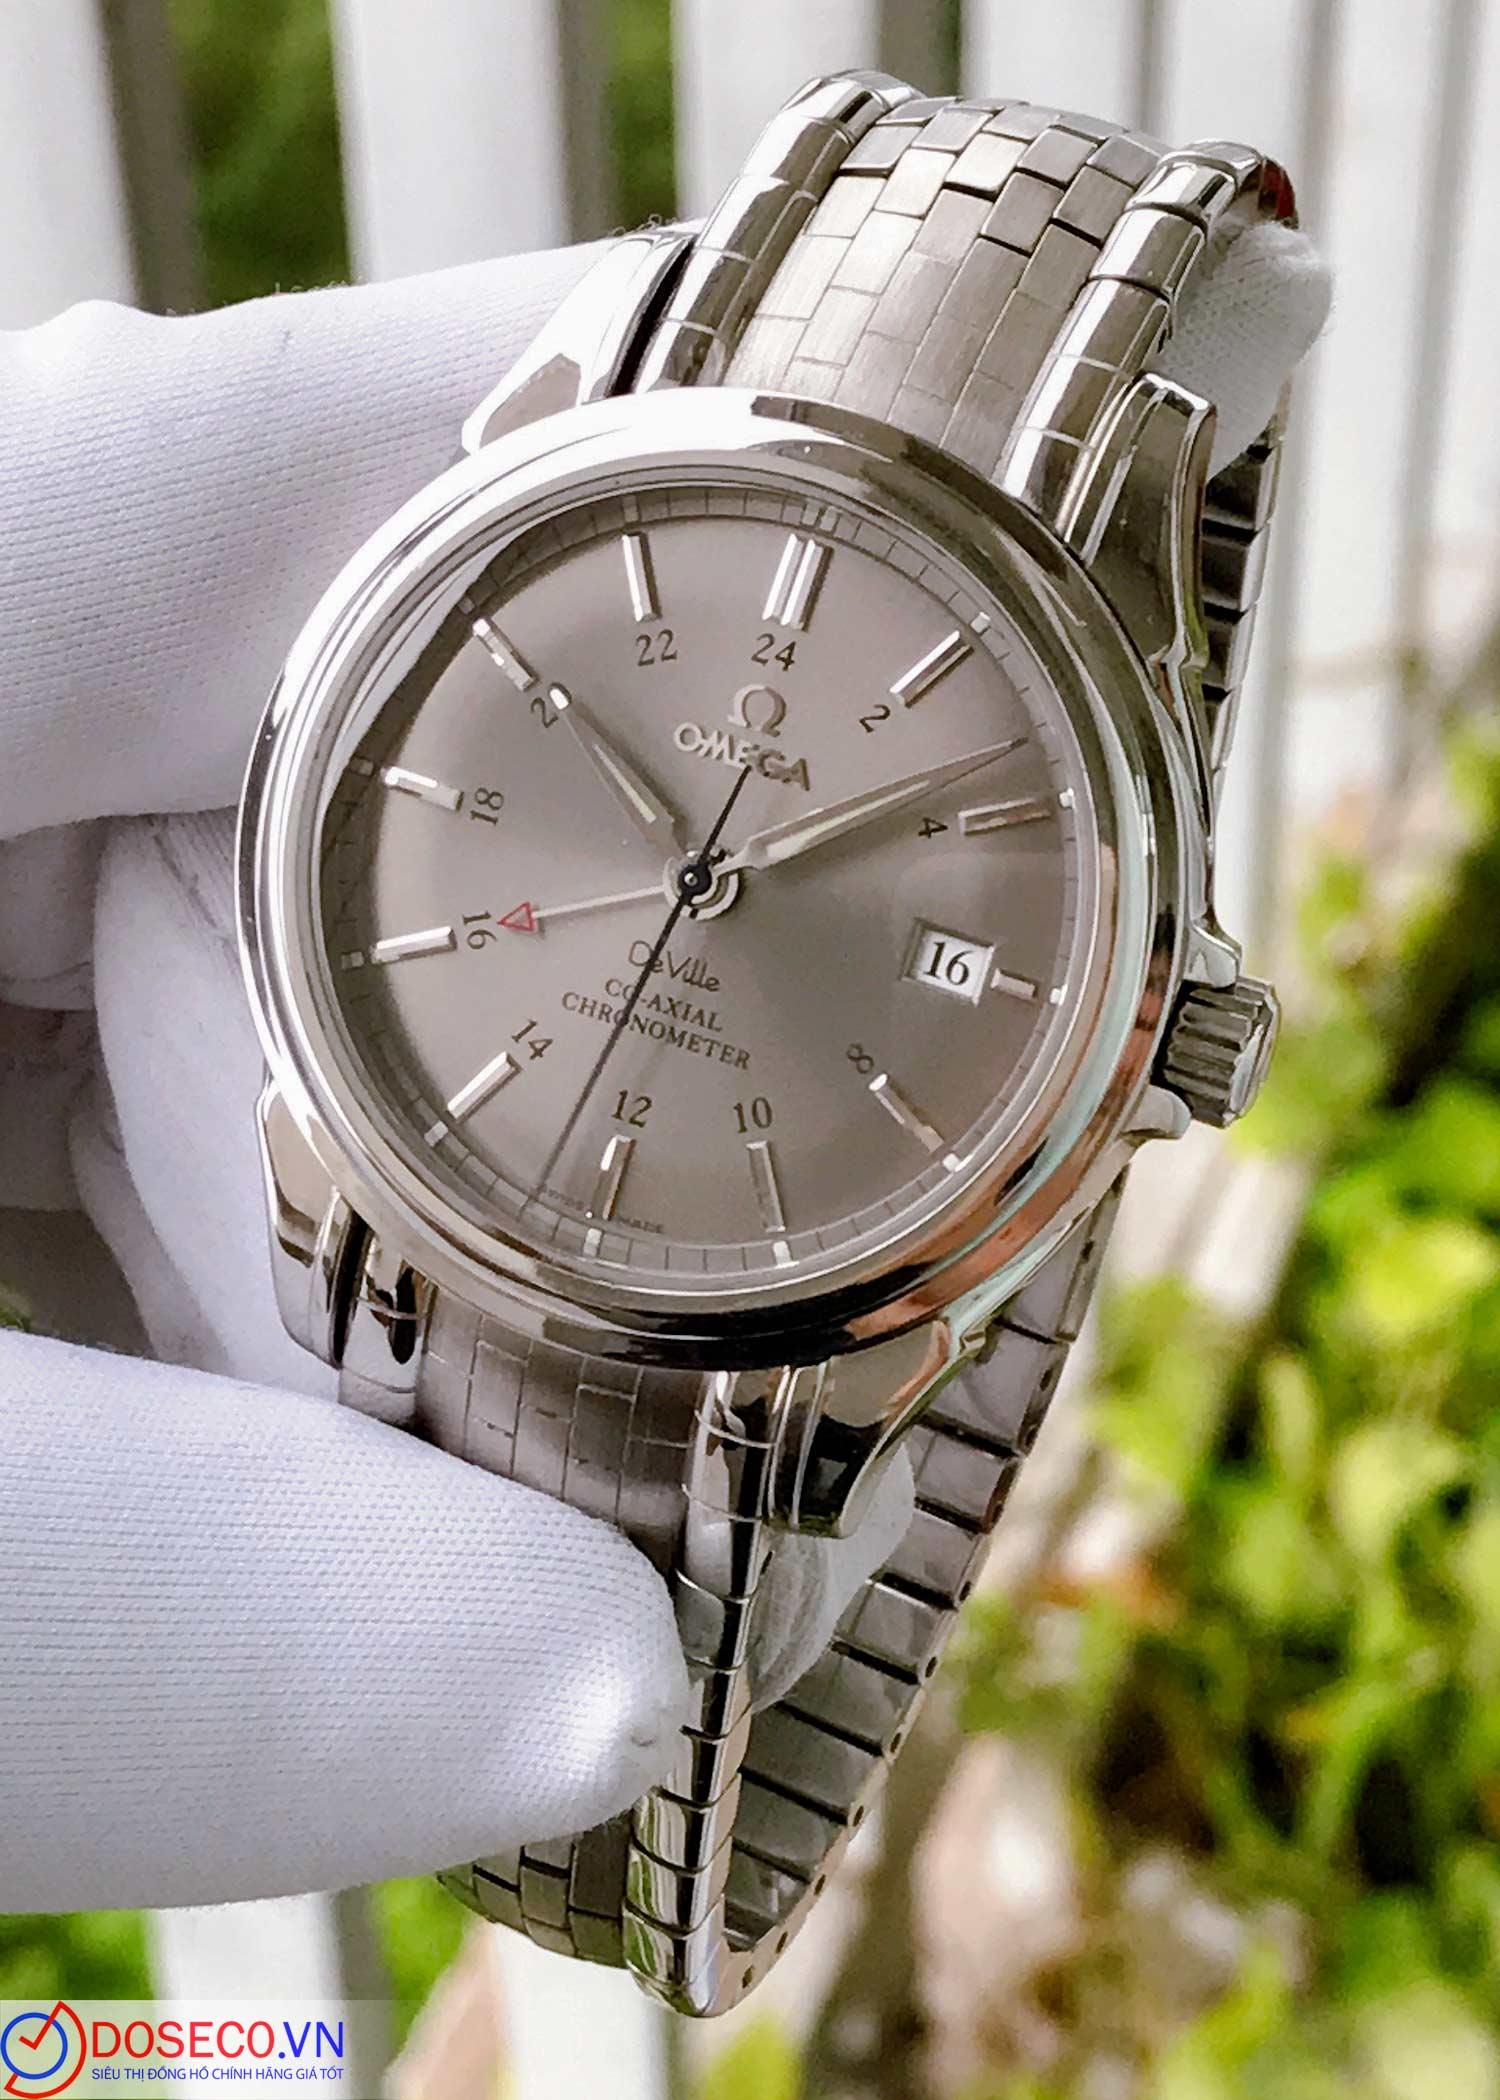 Omega Deville Vảy rồng Co-Axial Chronometer GMT 4533.41.00 (45334100) used.jpg